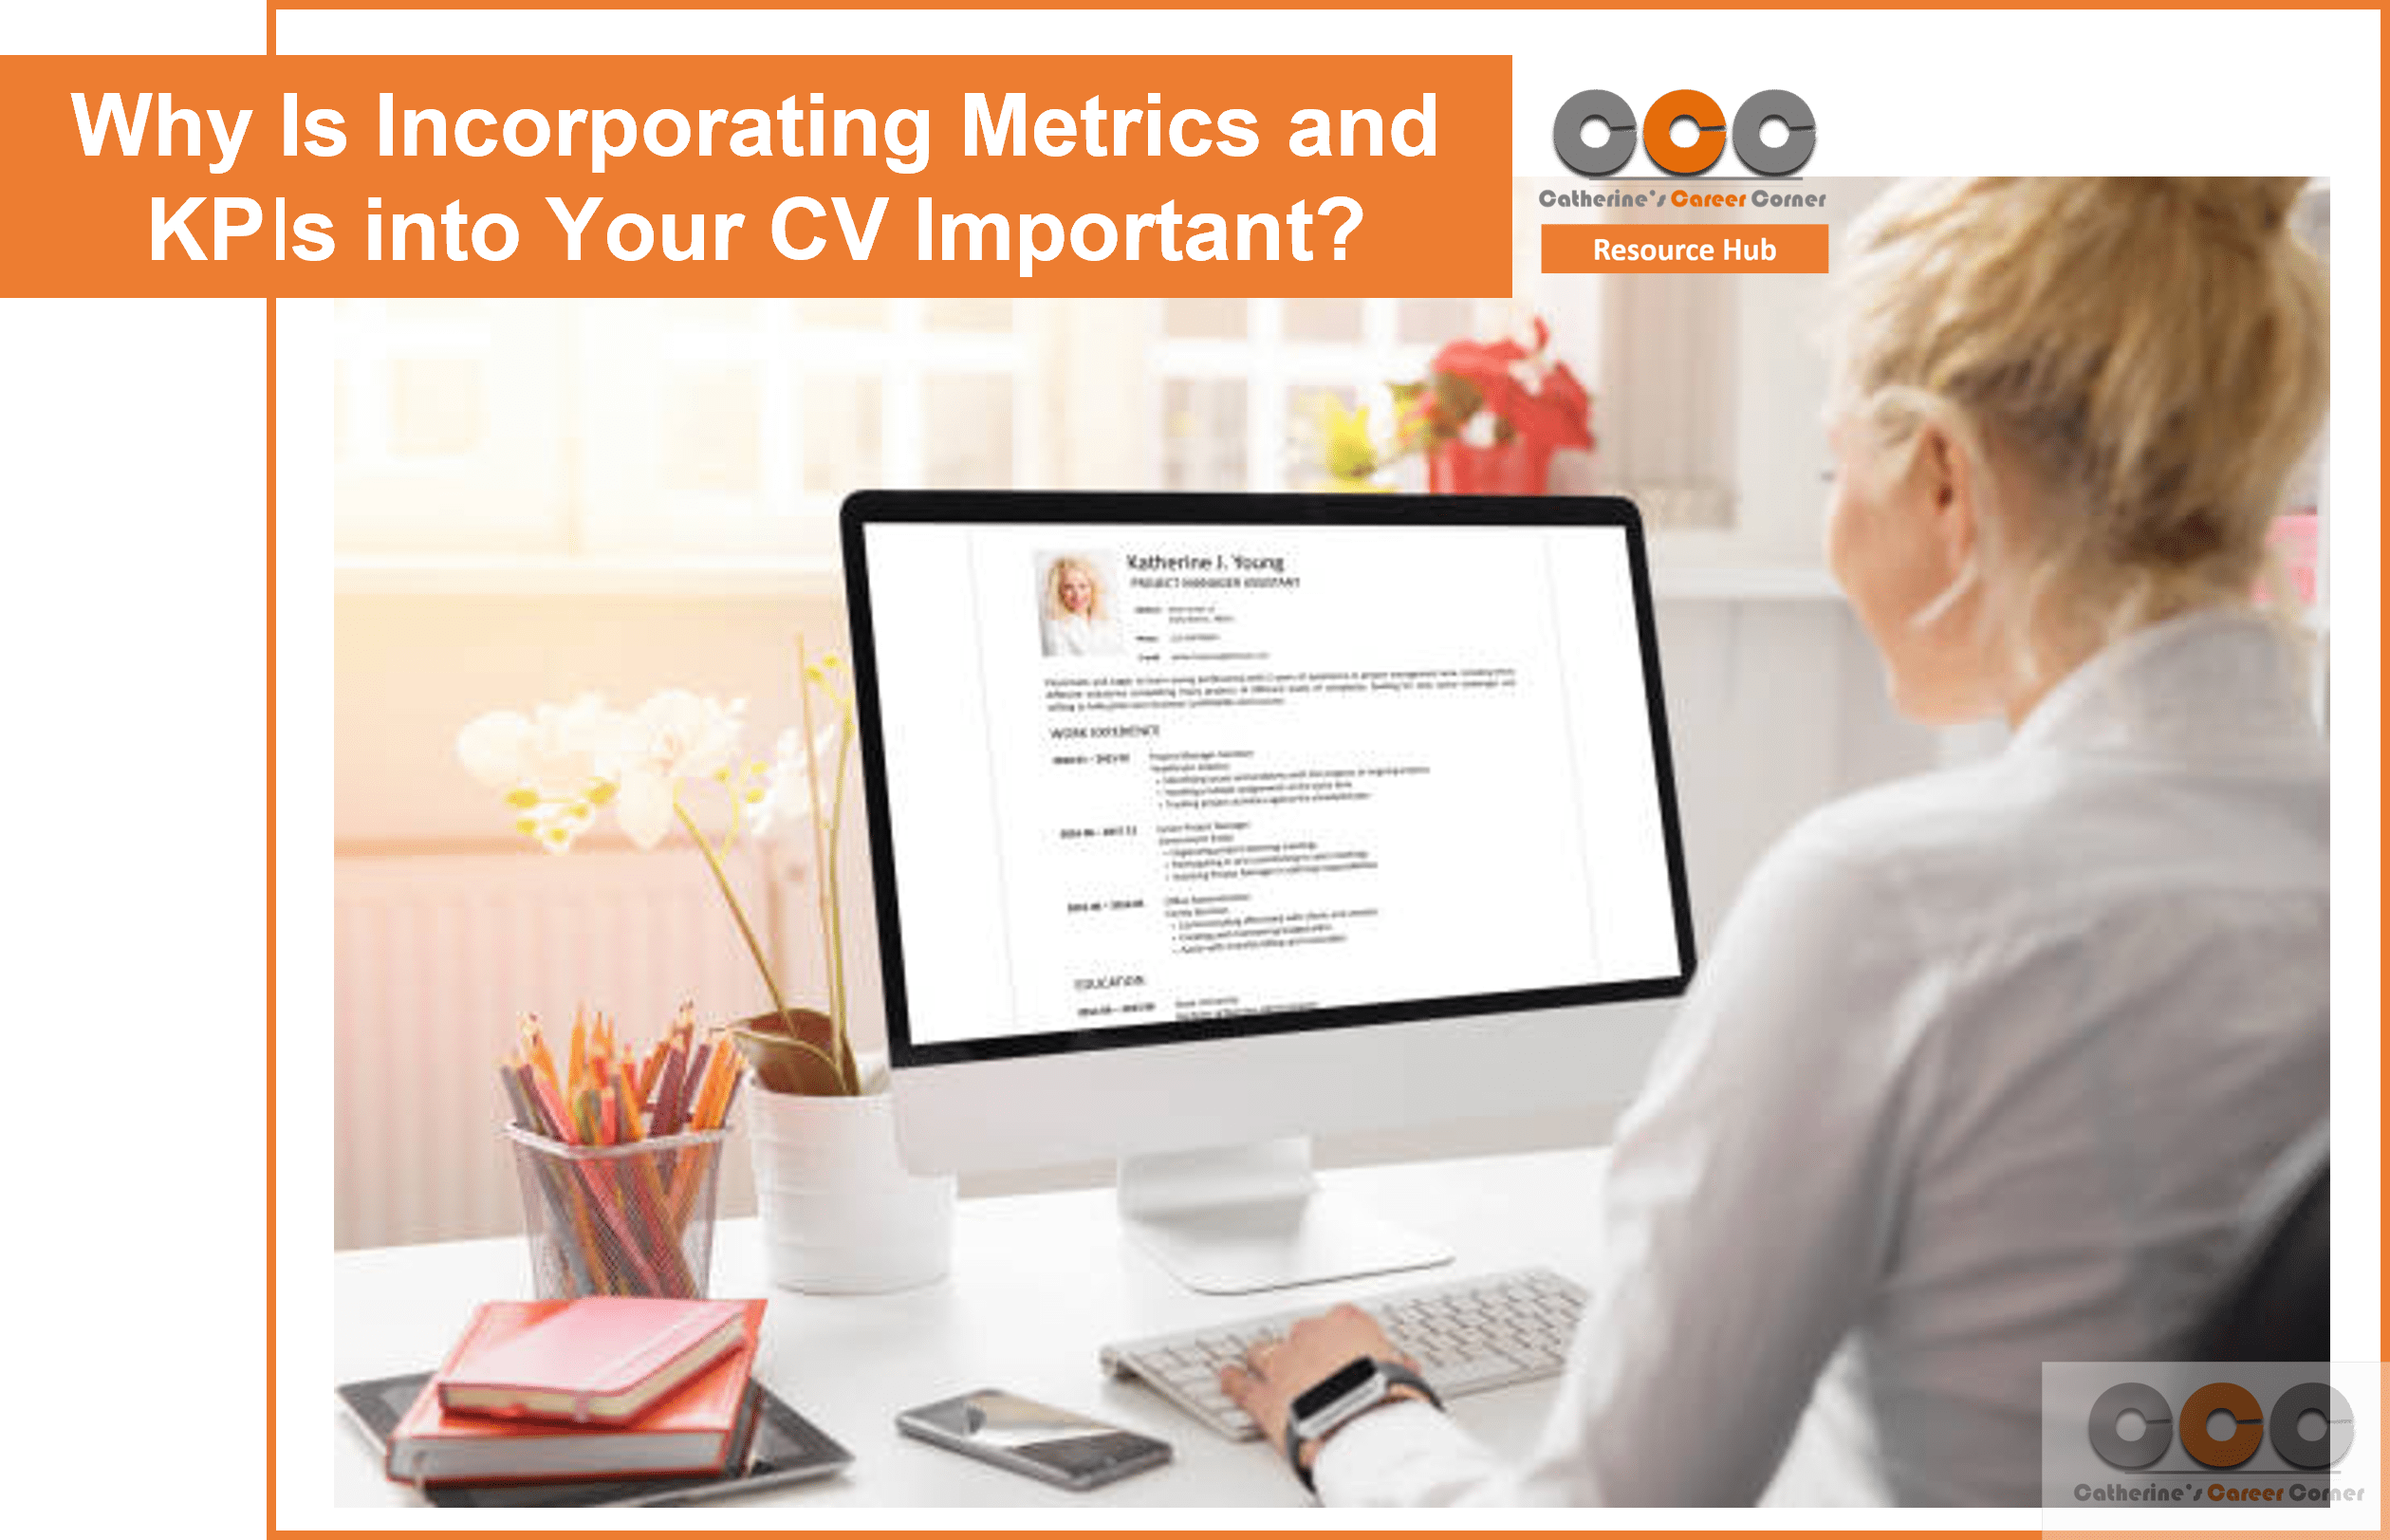 Why Is Incorporating Metrics and KPIs into Your CV Important?